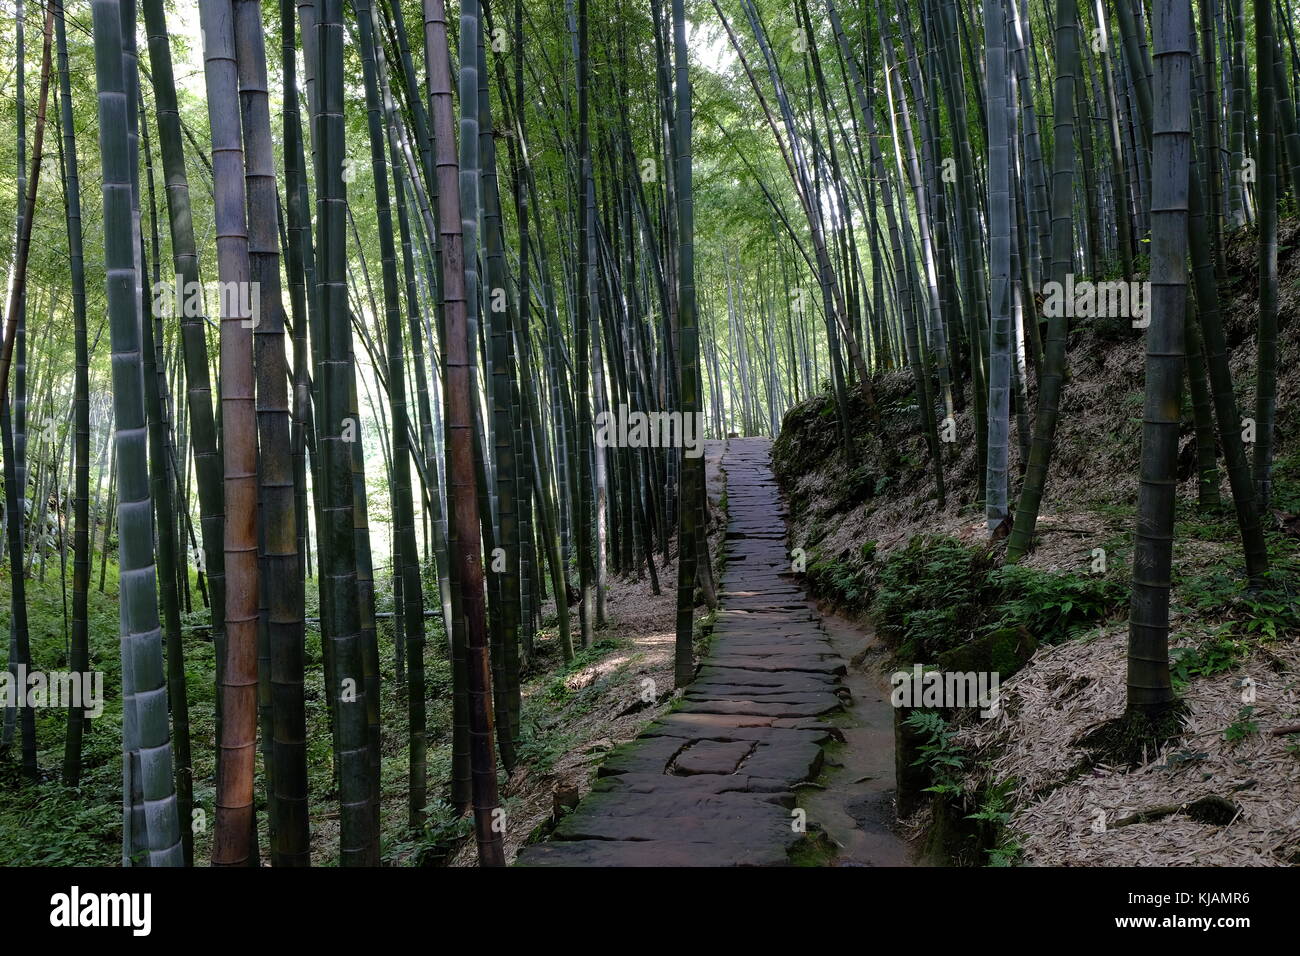 Pathway leading through the bamboo forest in the Shunan Bamboo Forest in Sichuan province in China Stock Photo